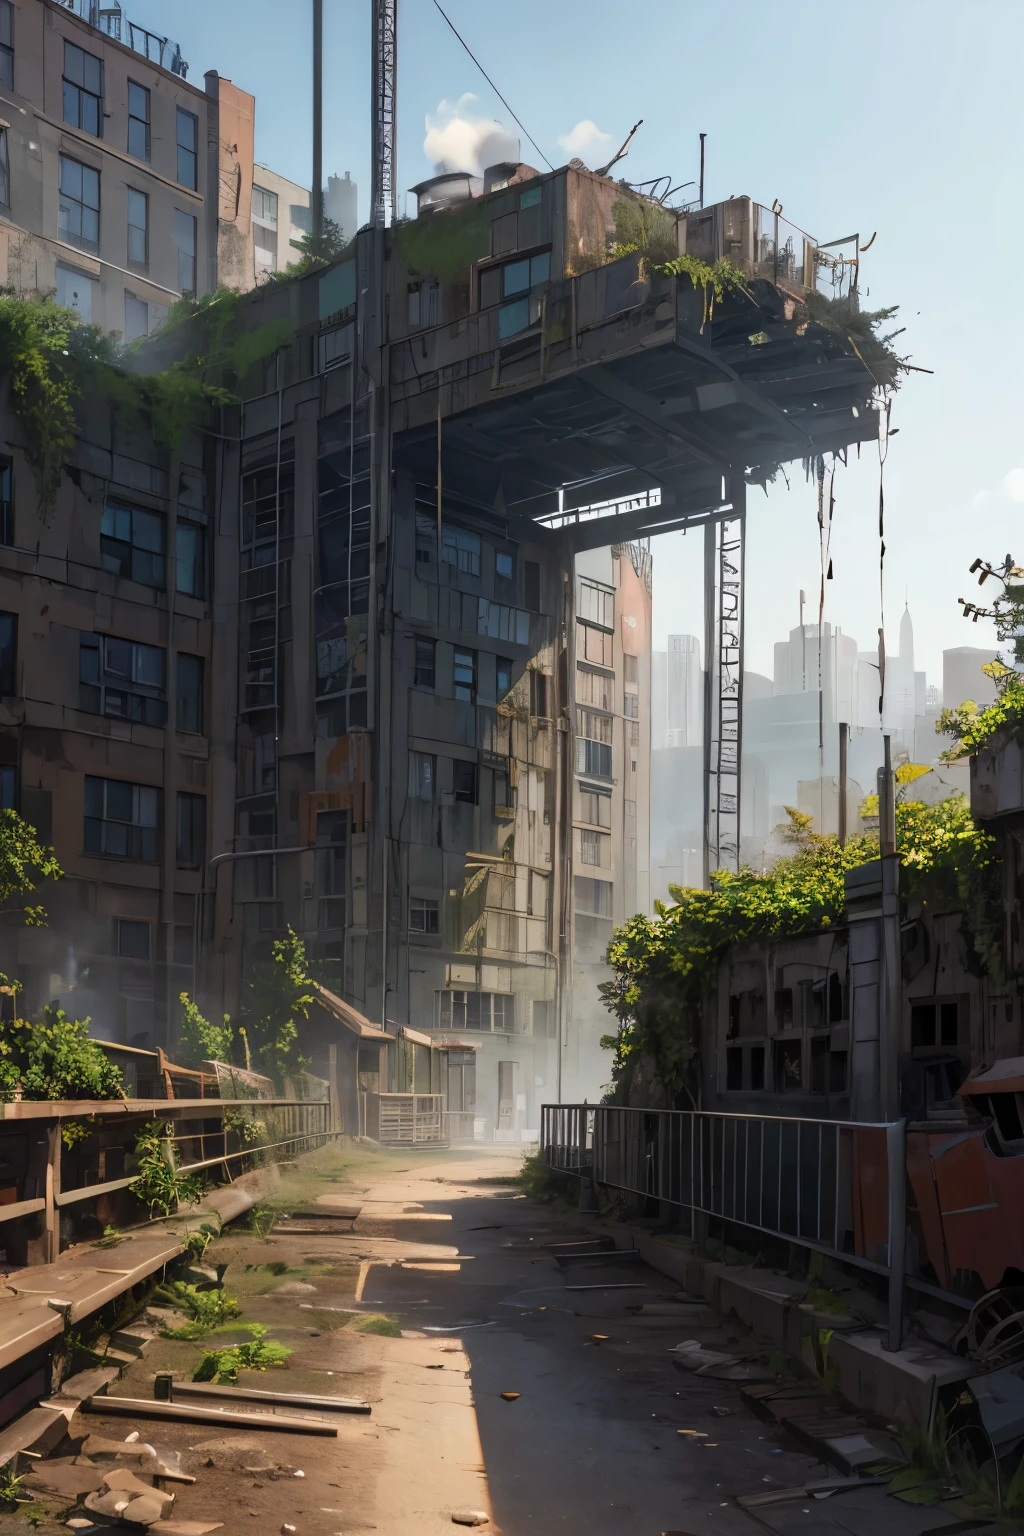 a park in a city in technological ruins with gears and pipes belching steam